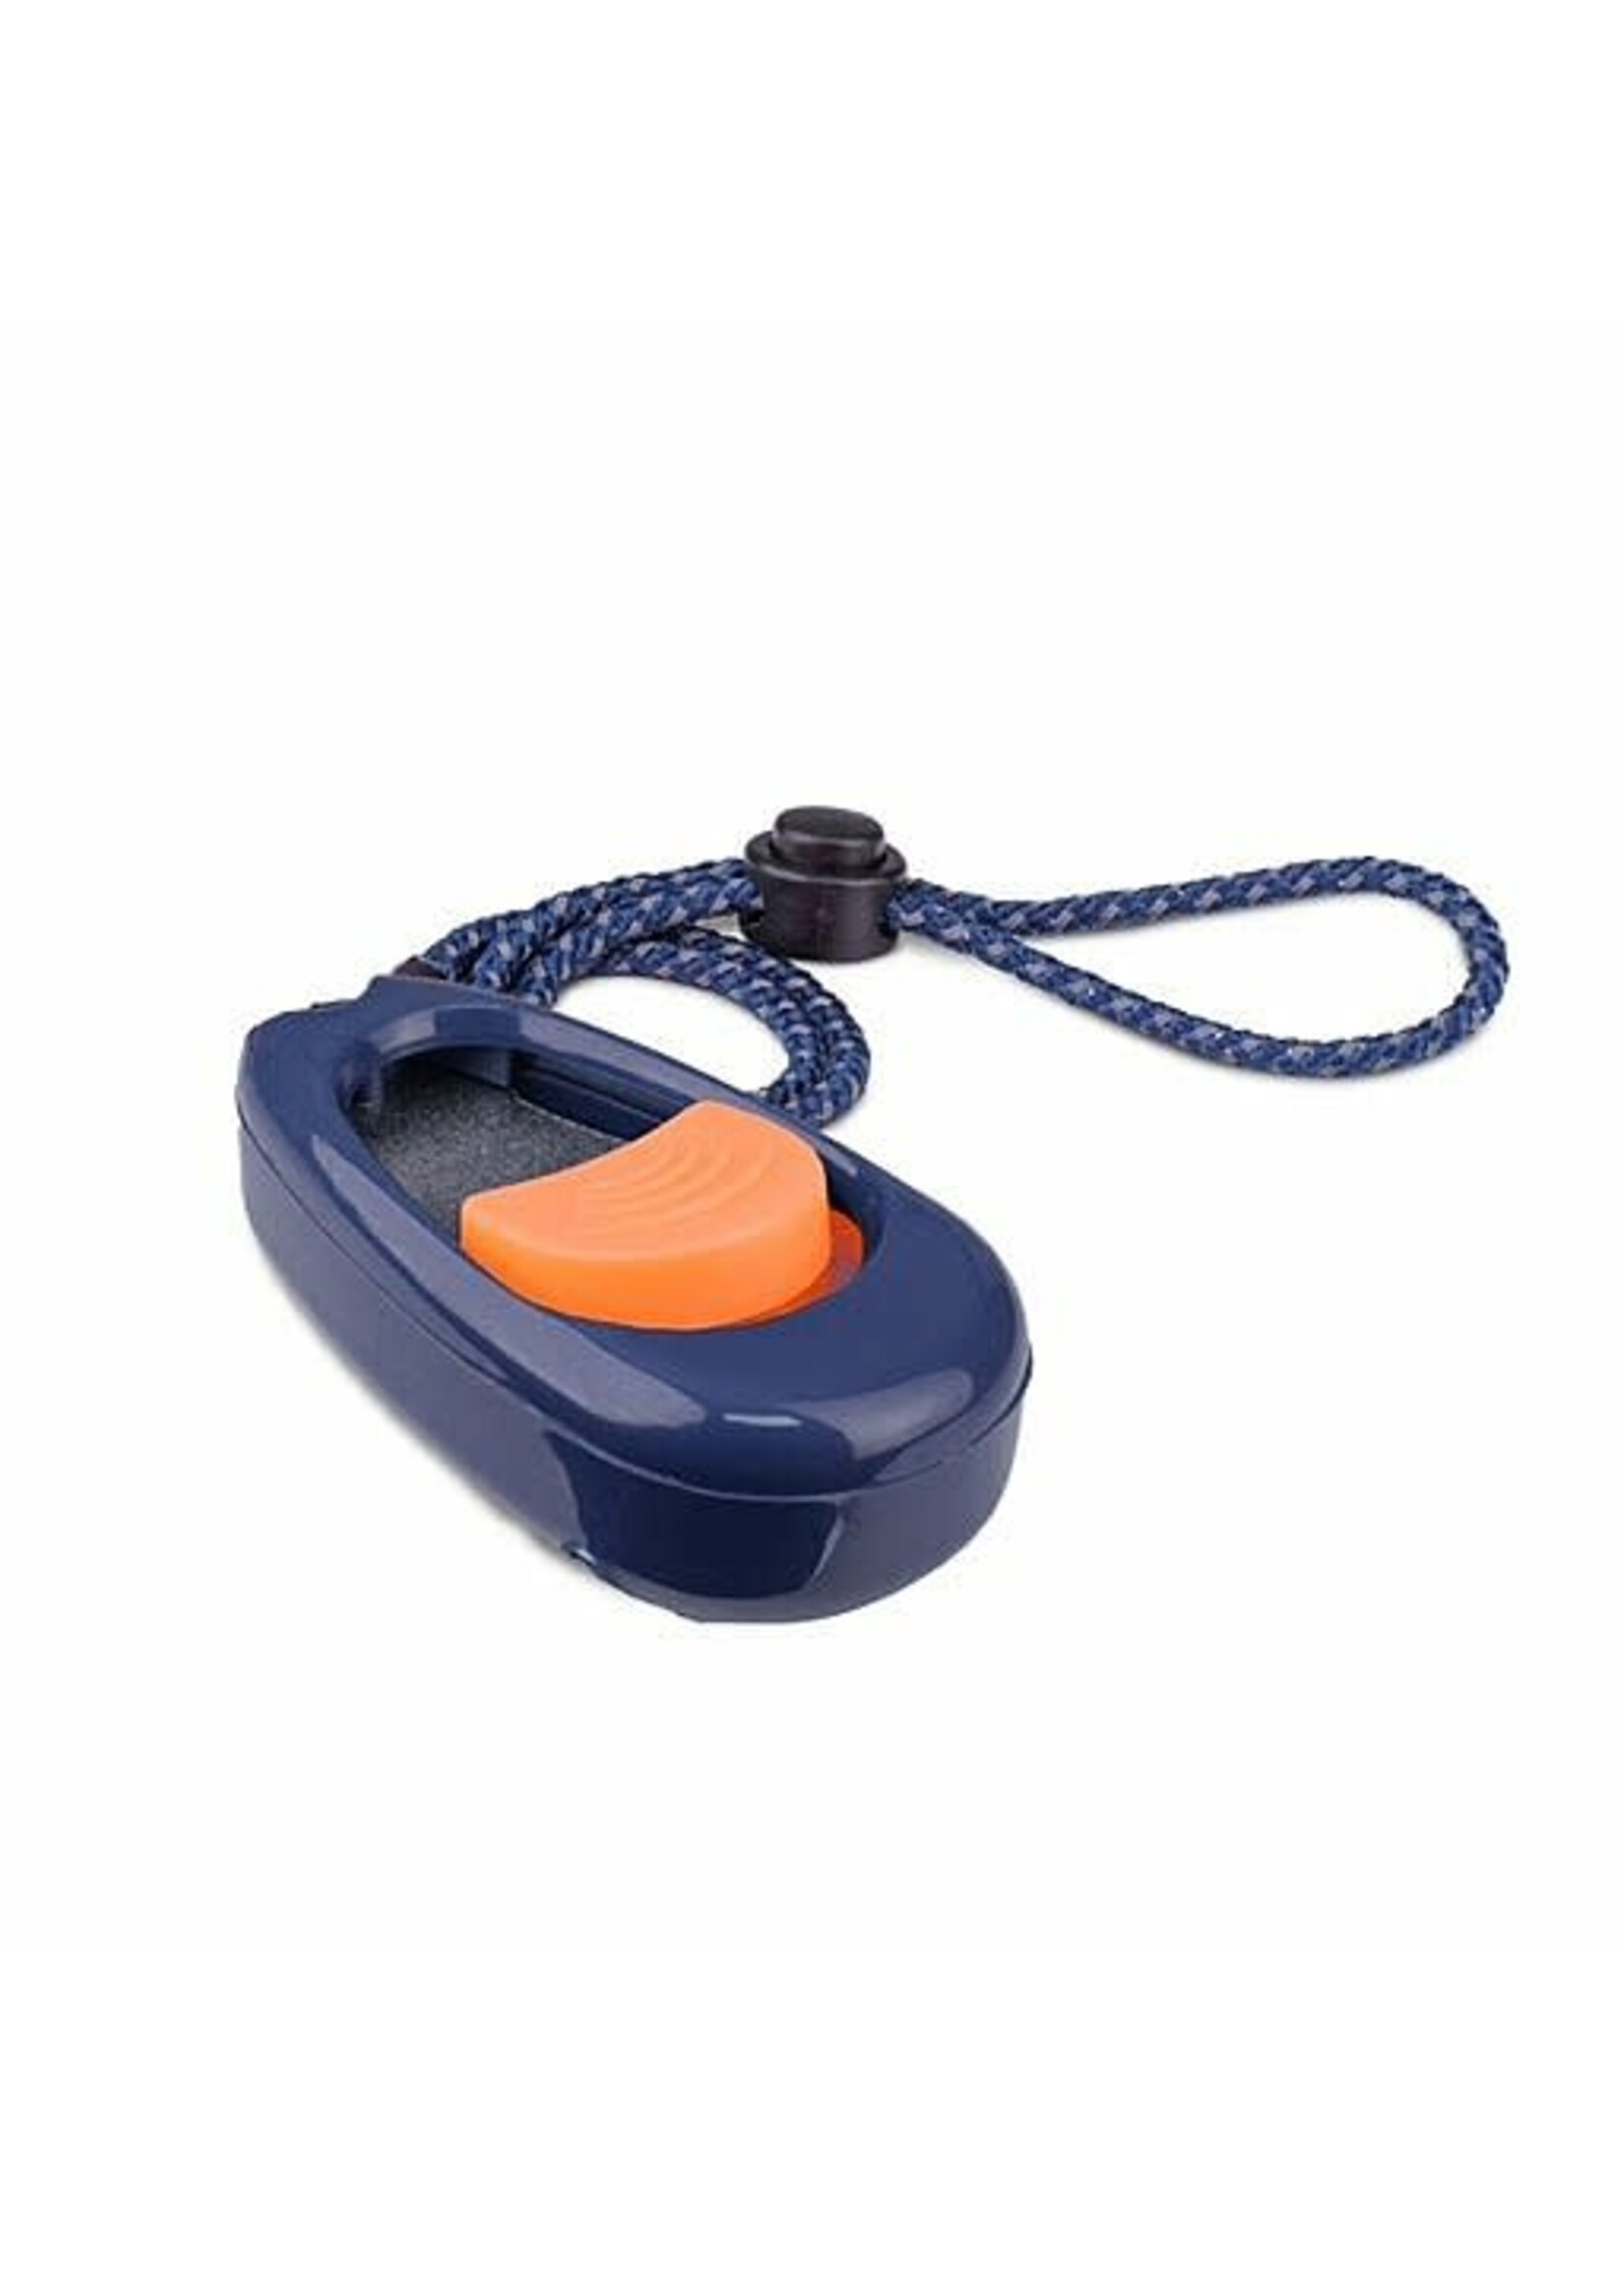 The Company of Animals The Company of Animal Multi-Clicker Navy & Coral